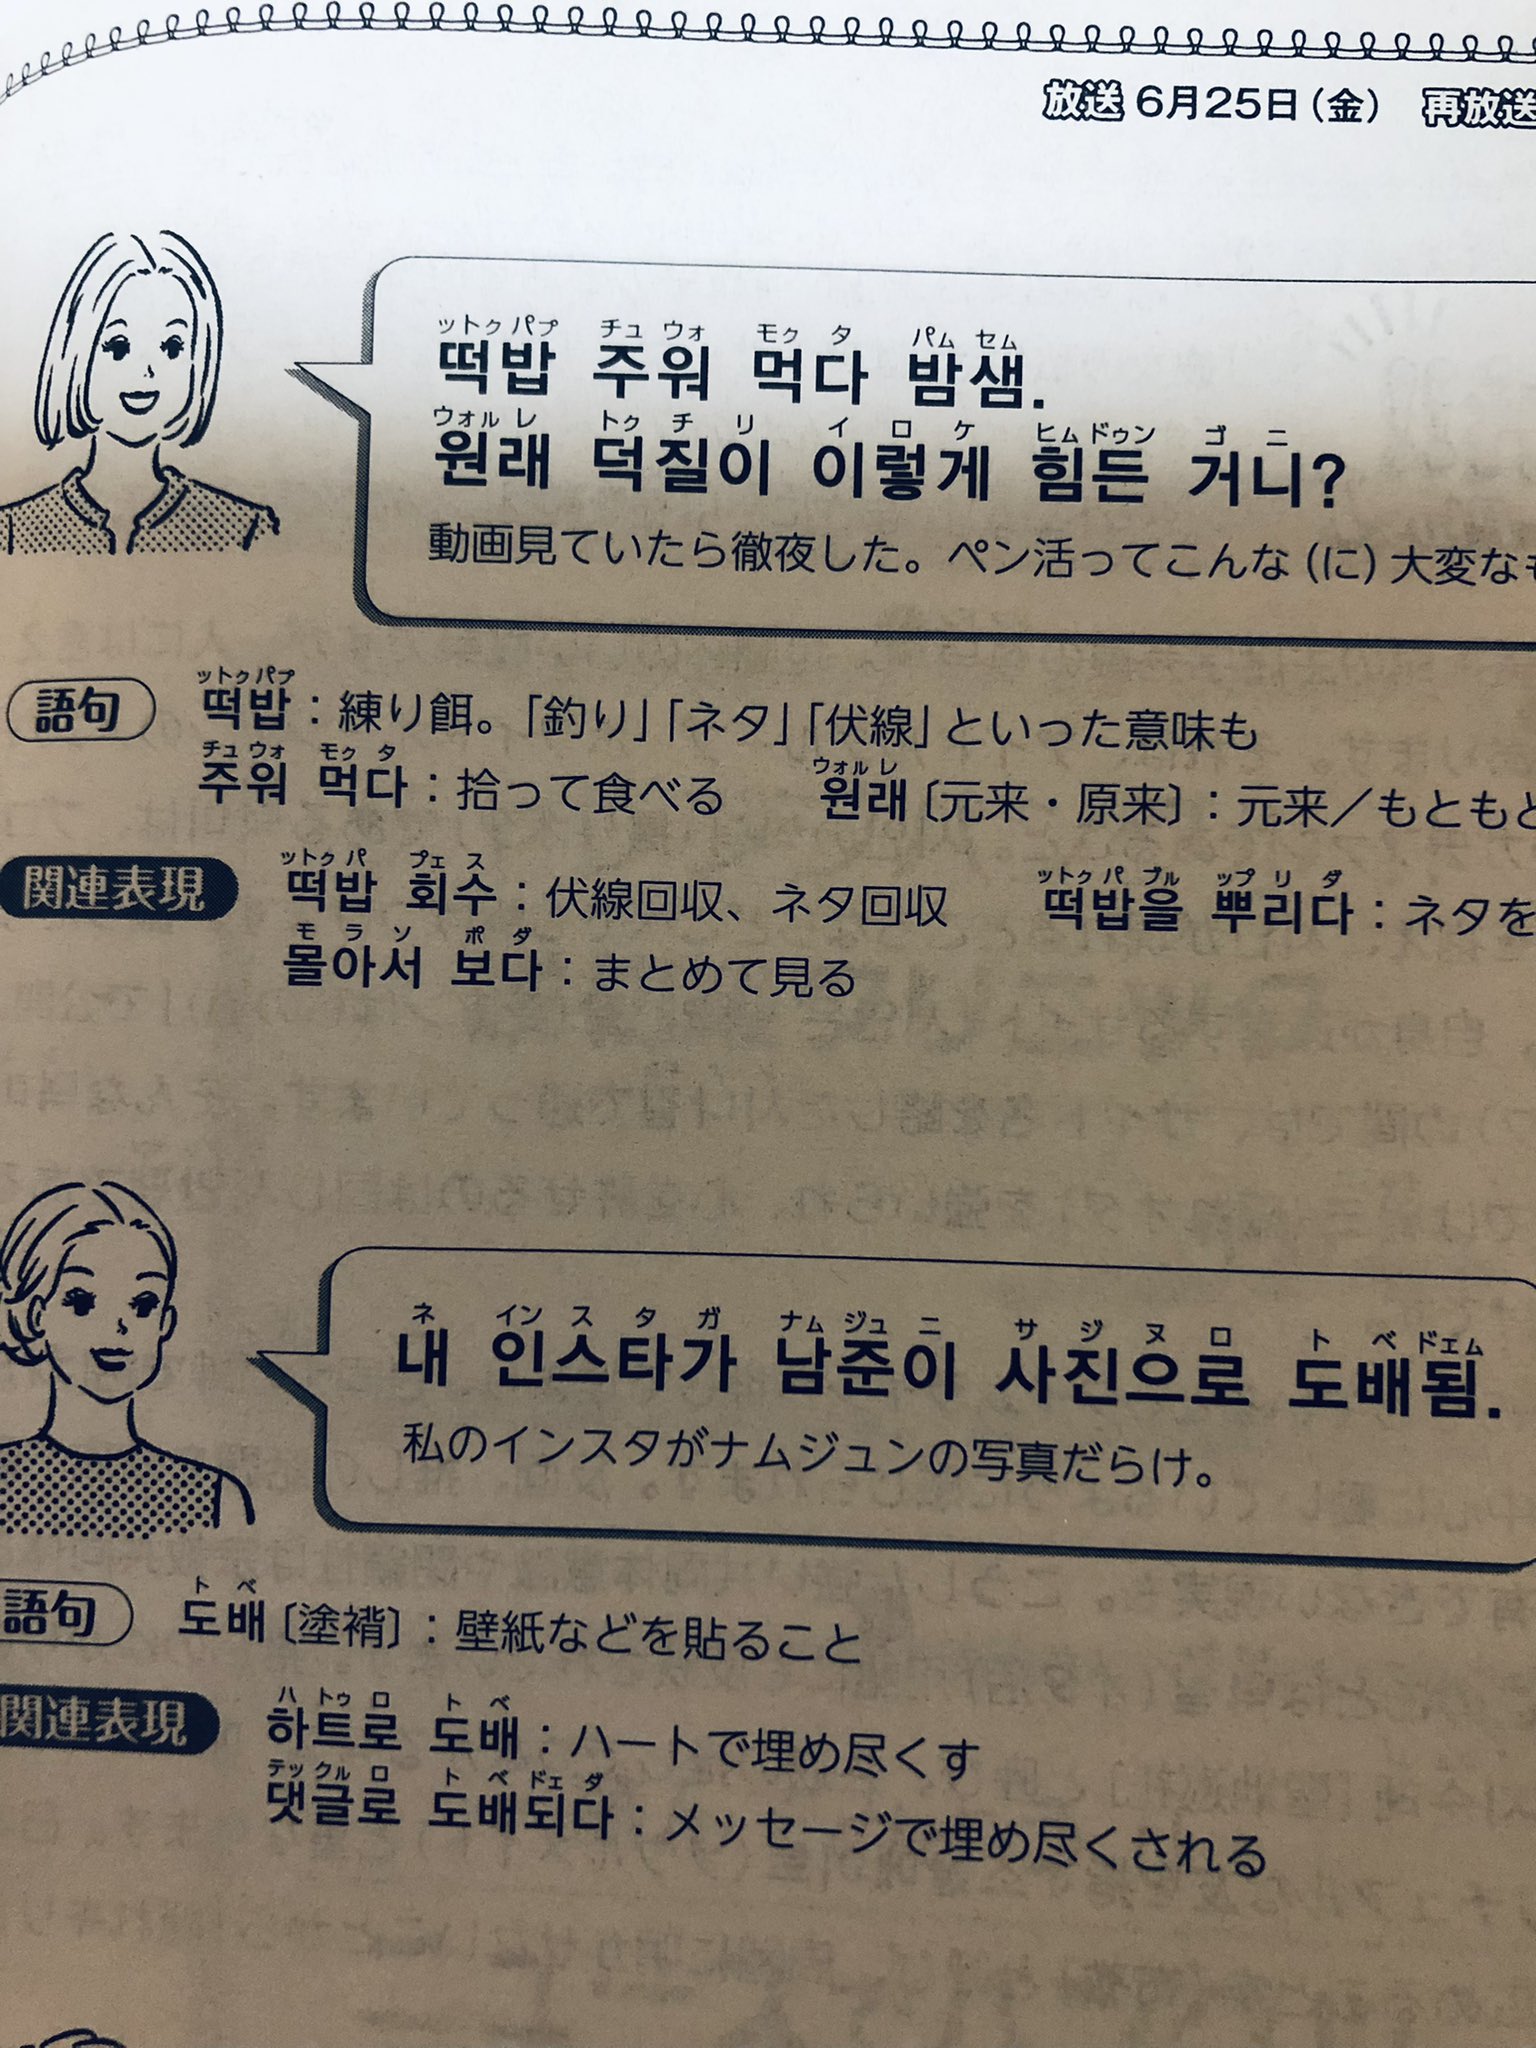 What's up with Japan's Korean textbooks?jpg.